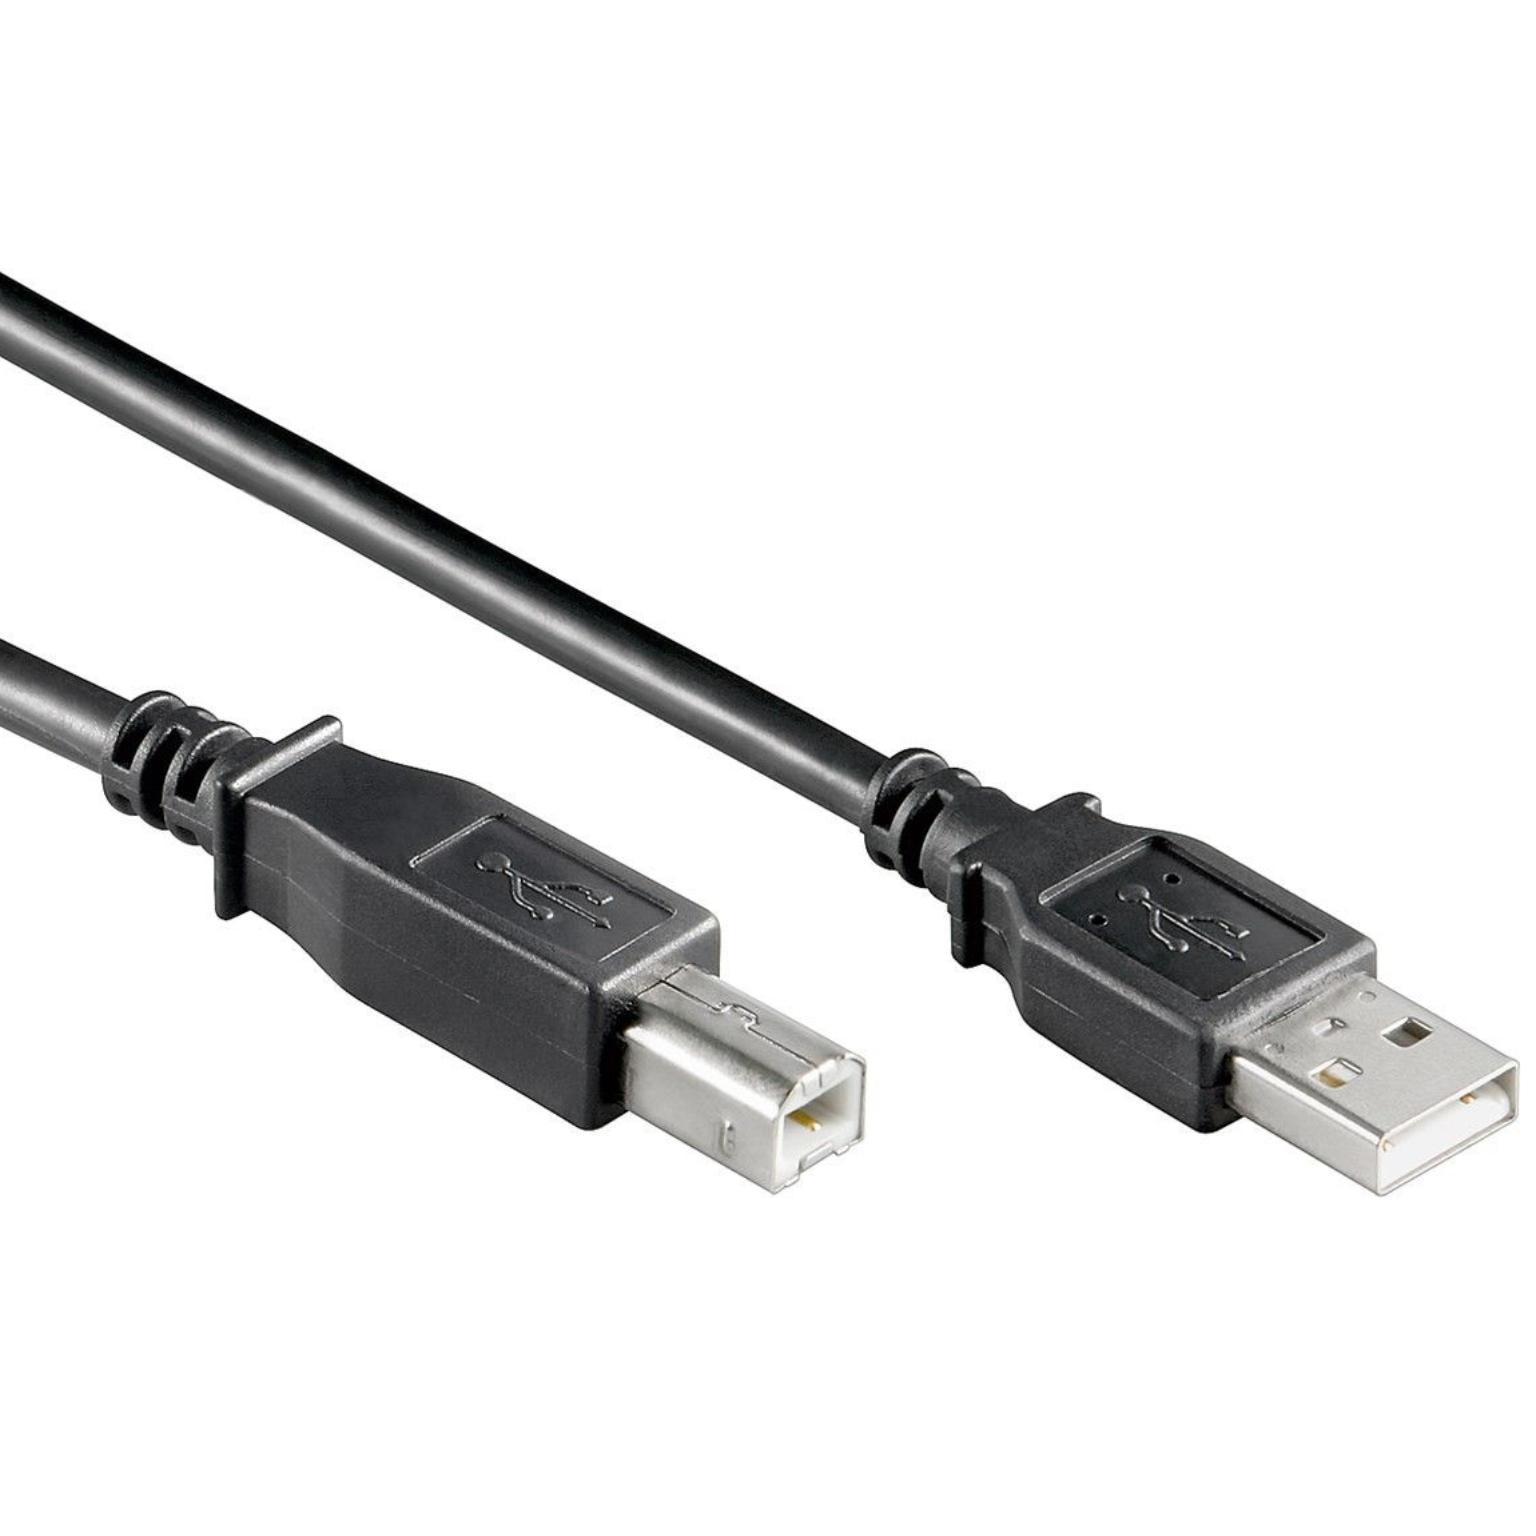 https://image.allekabels.be/image/1169569-0/usb2.0-connection-cable-a-to-b-black-0-5m-0.50-meter.jpg